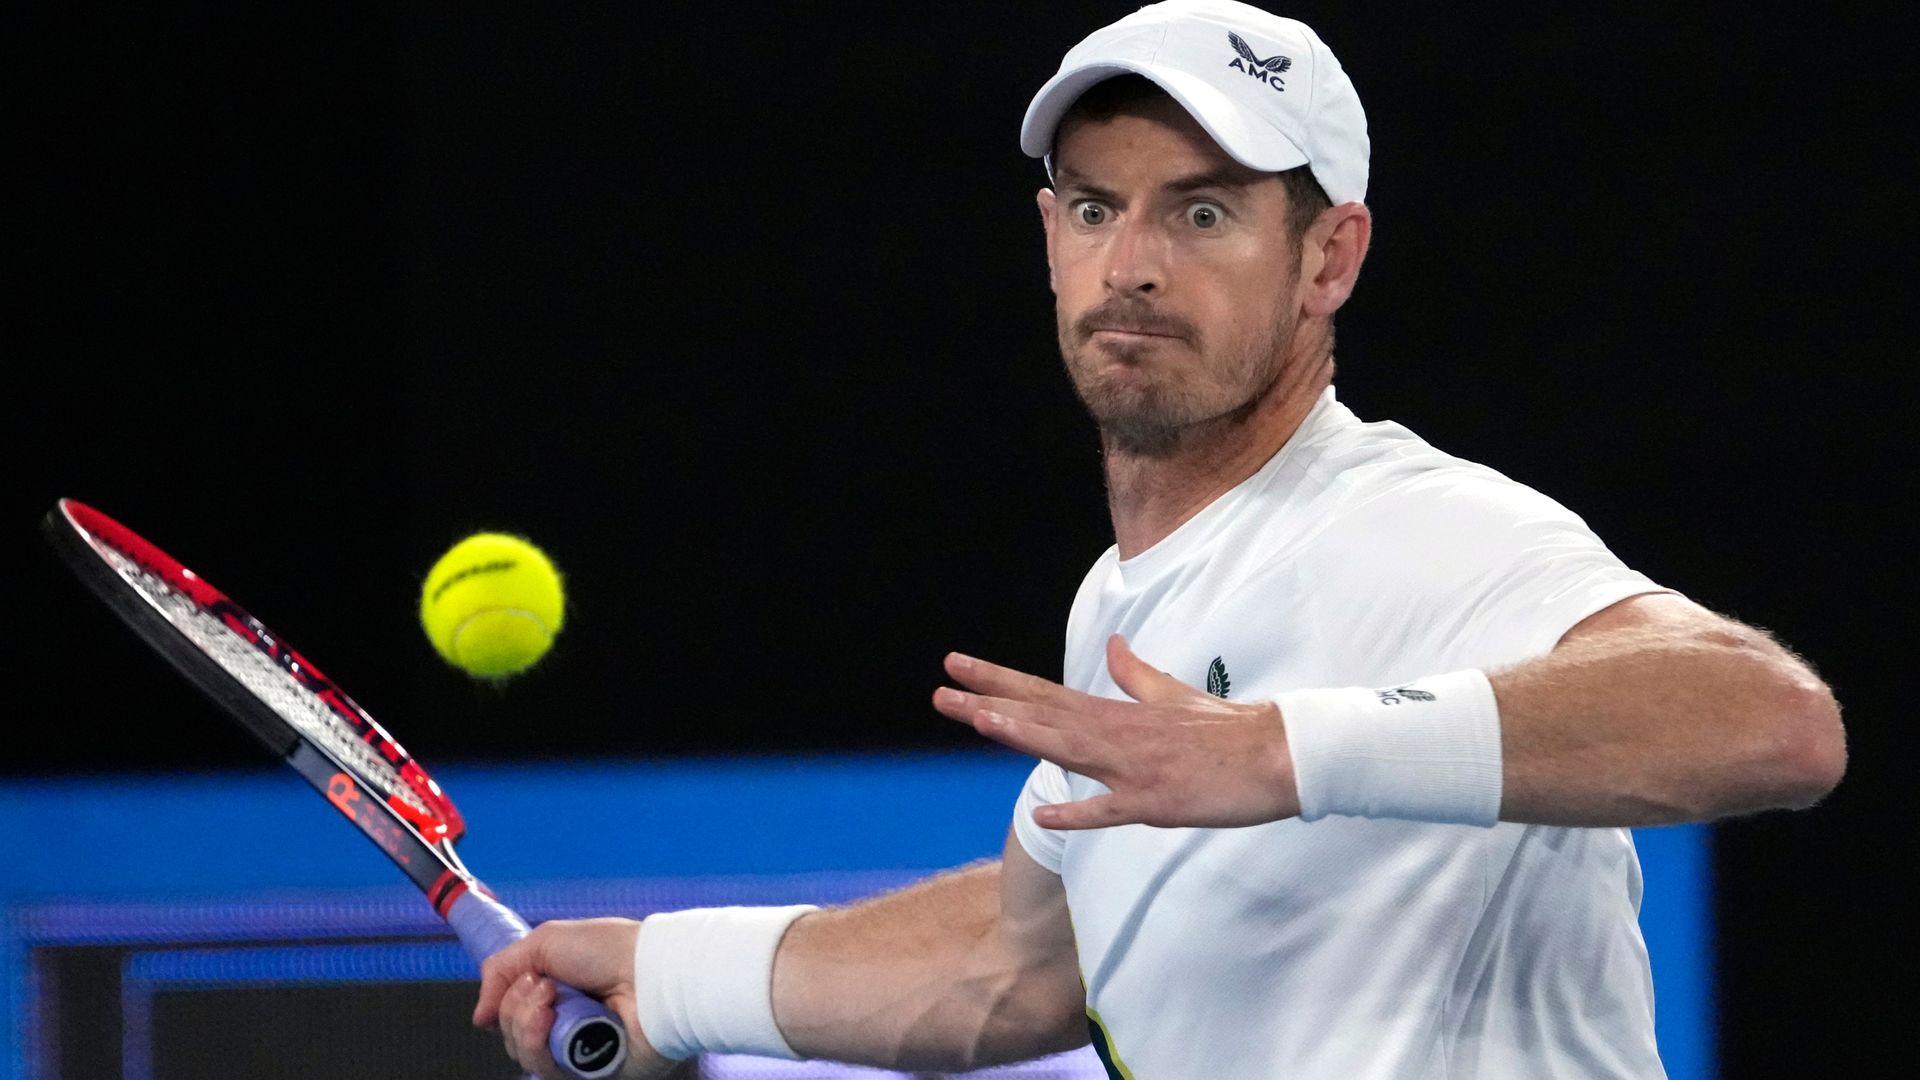 Ten and a half hours on court: Will Murray be ready for next test?